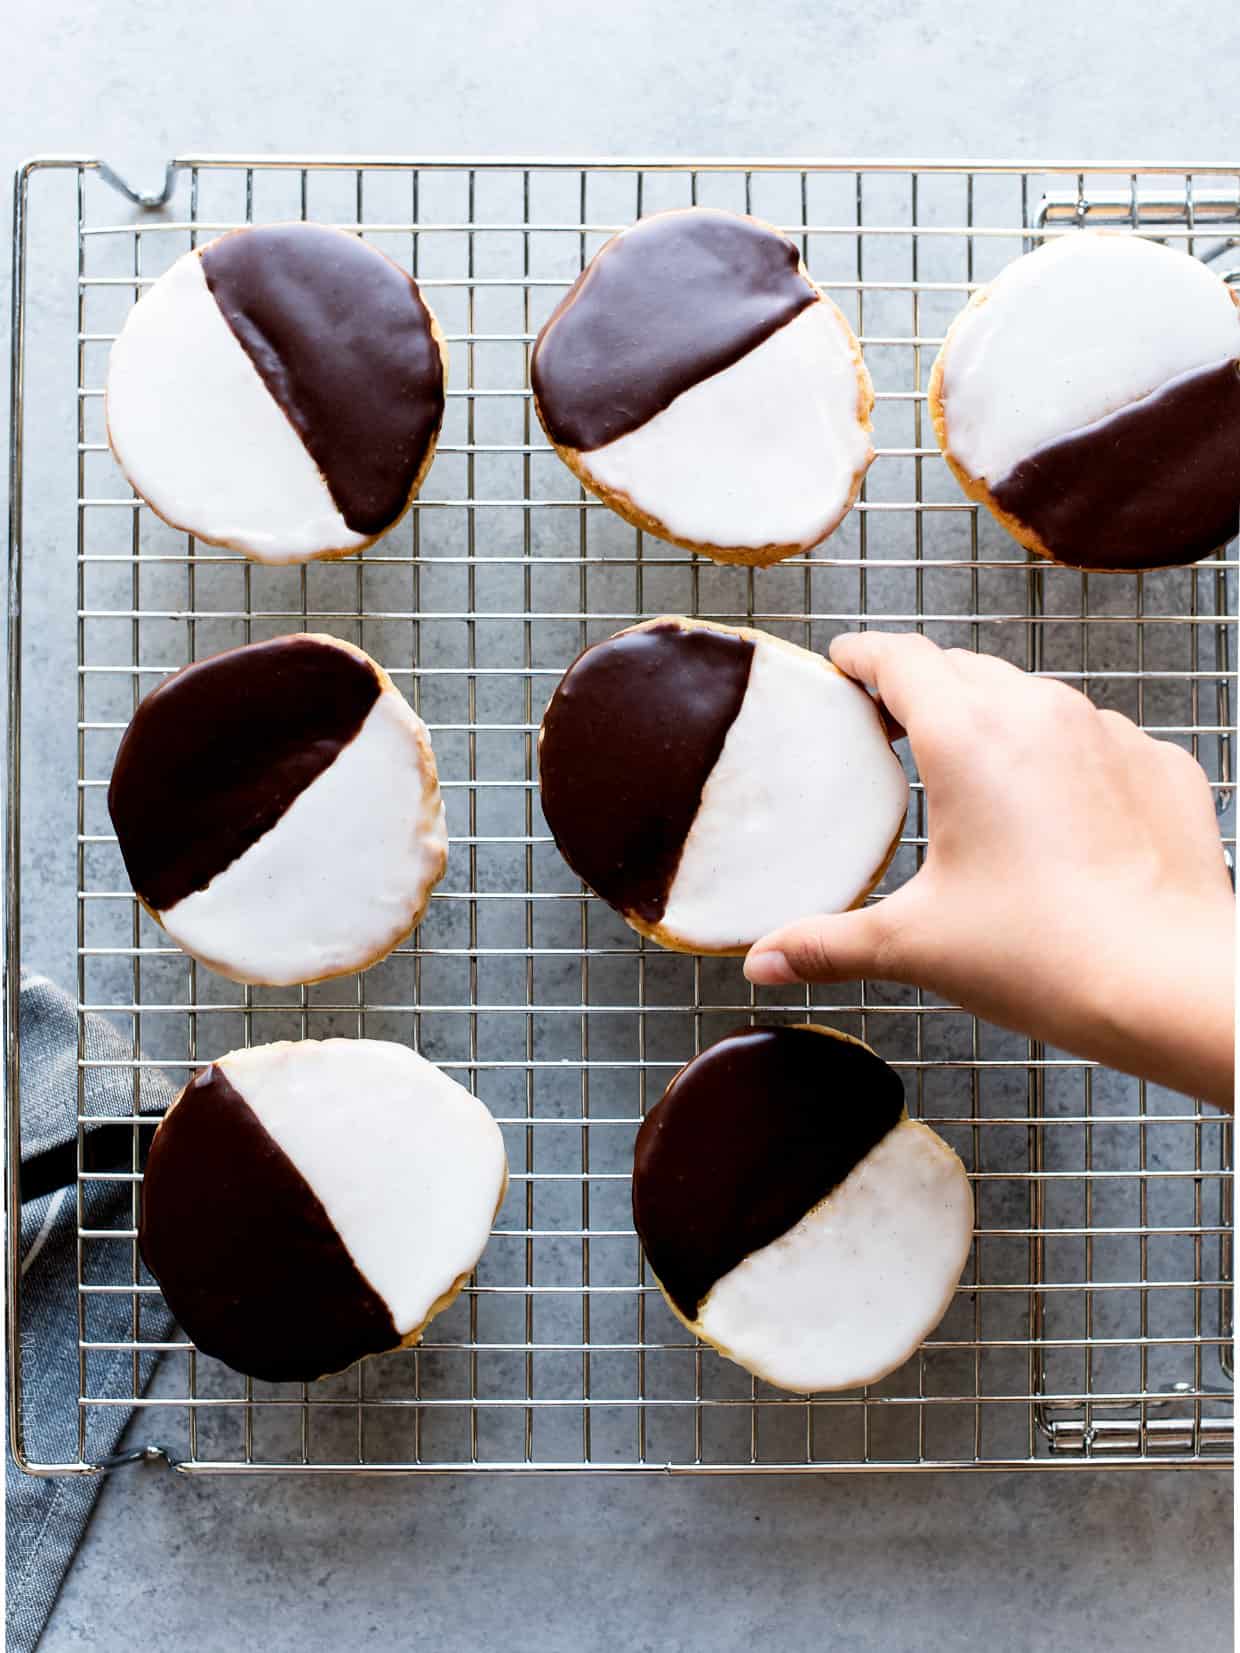 Black and White Cookies - a New York deli classic. Frosted with vanilla and chocolate icing, these cake-like cookies deliver the best of both worlds.